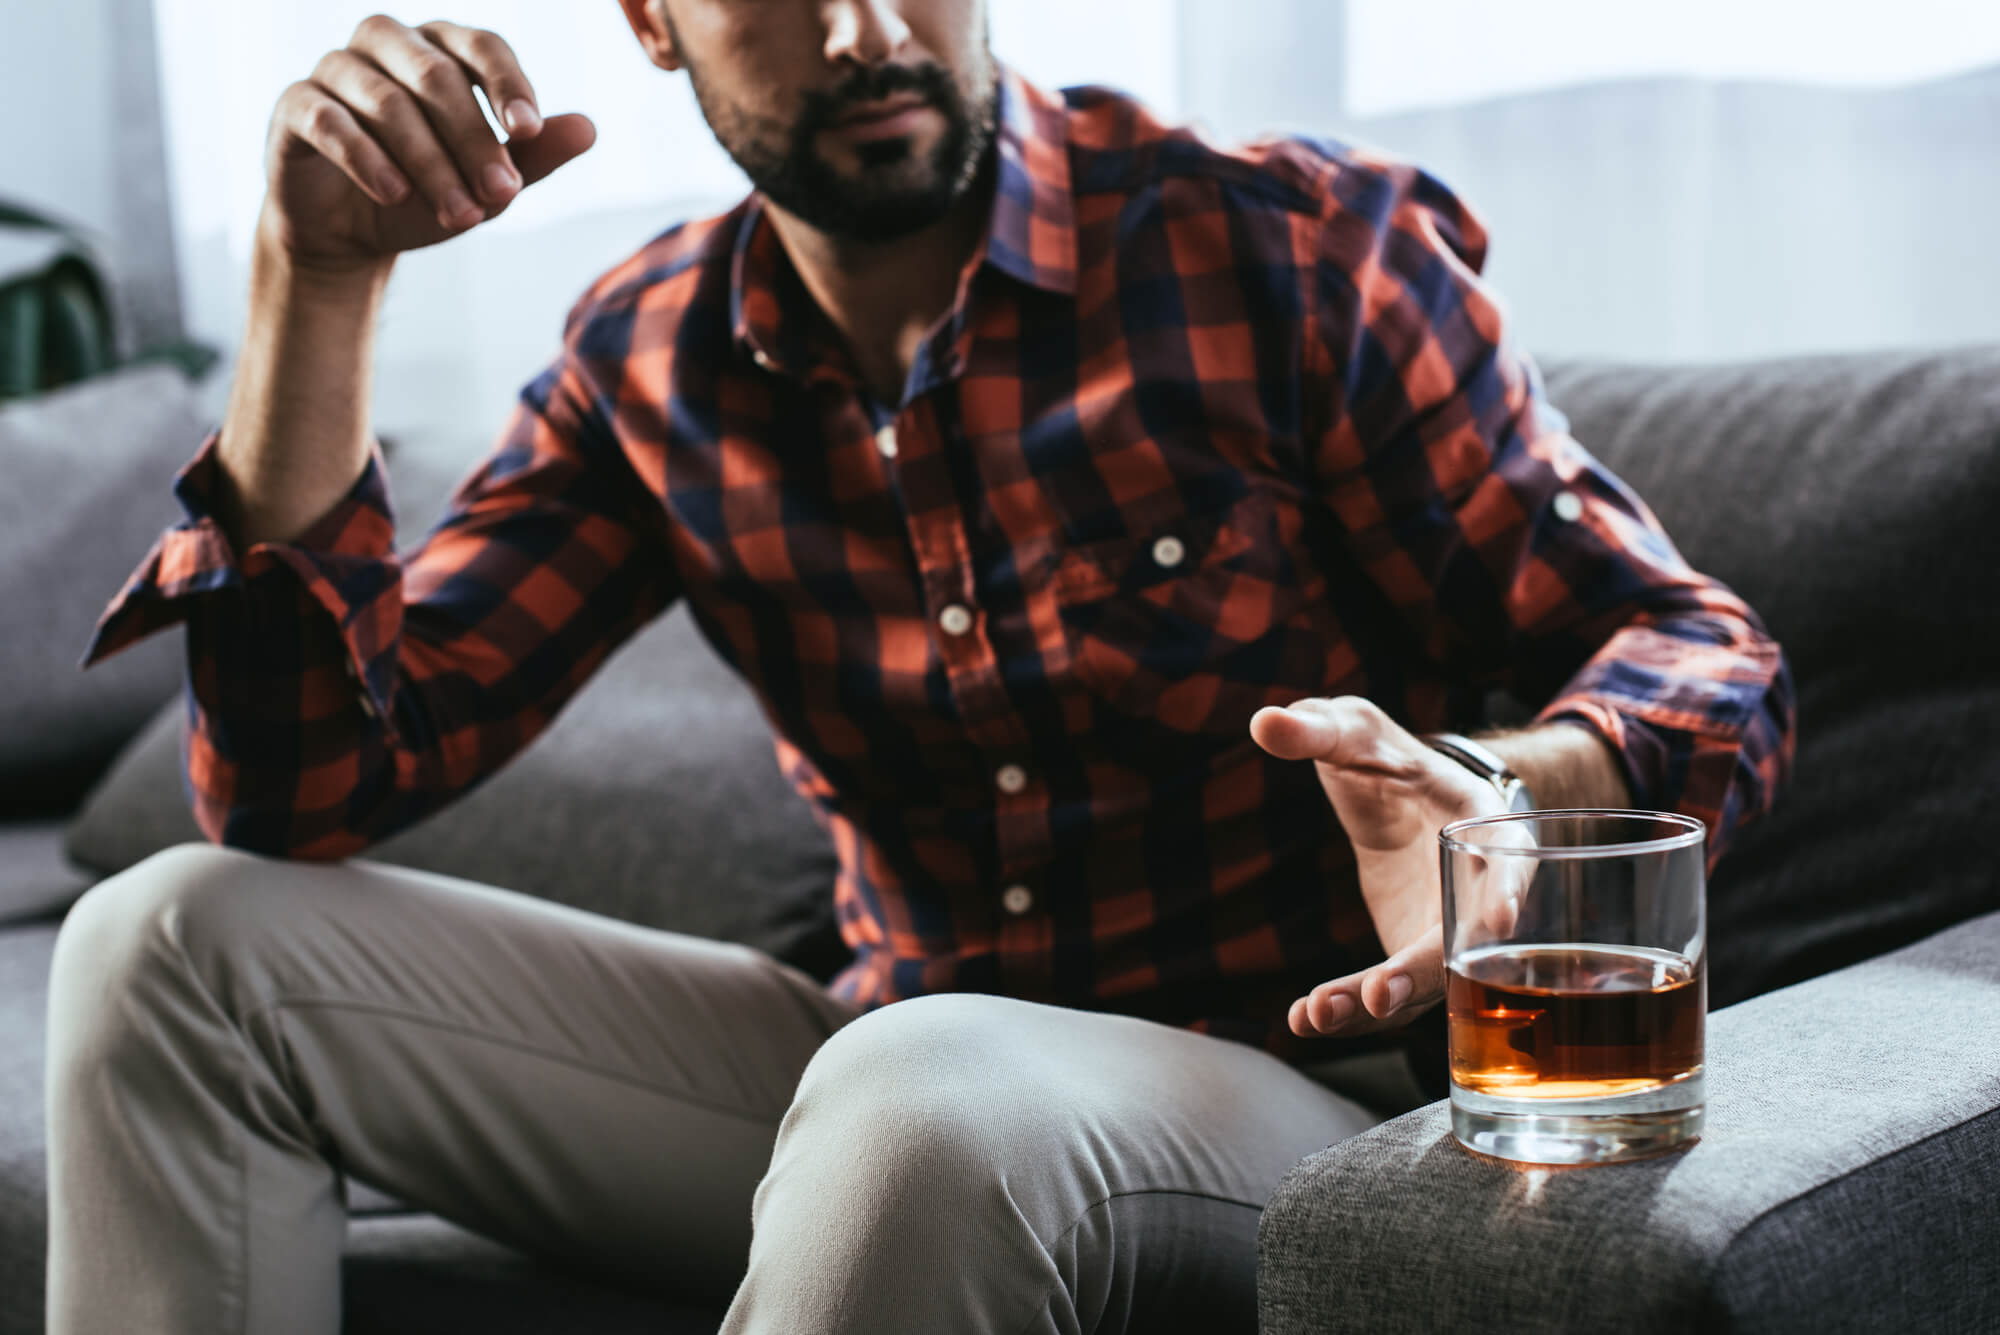 Man with a beard and plaid shirt reaches from the sofa to pick up a tumbler of alcohol, which can cause low testosterone when consumed to excess.